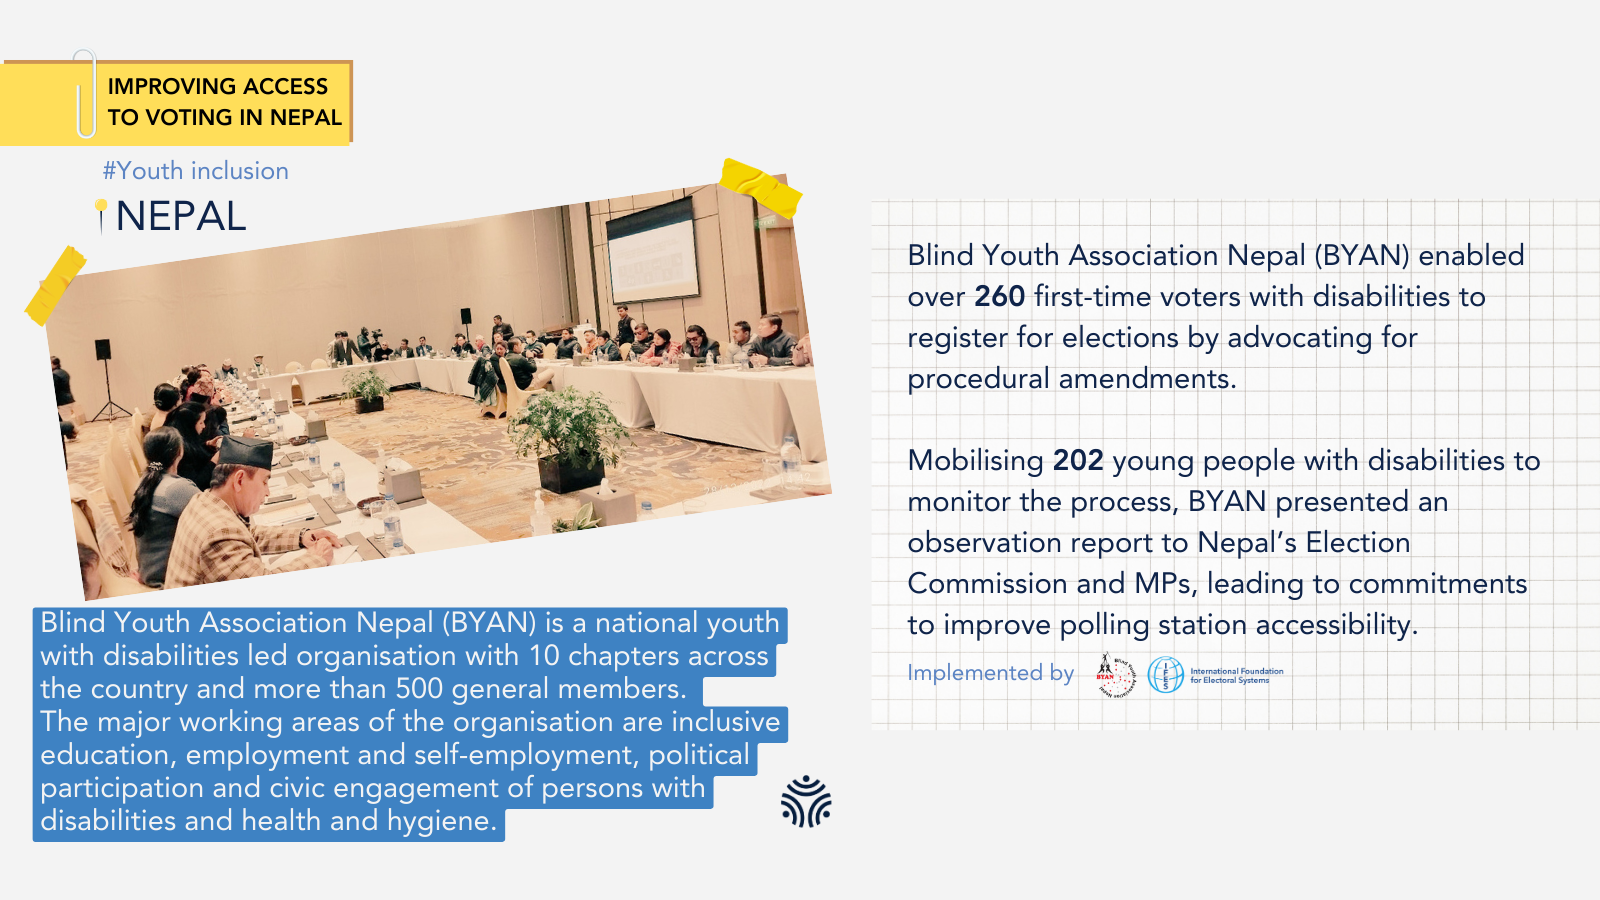 Commitment #17 - Improving access to voting in Nepal